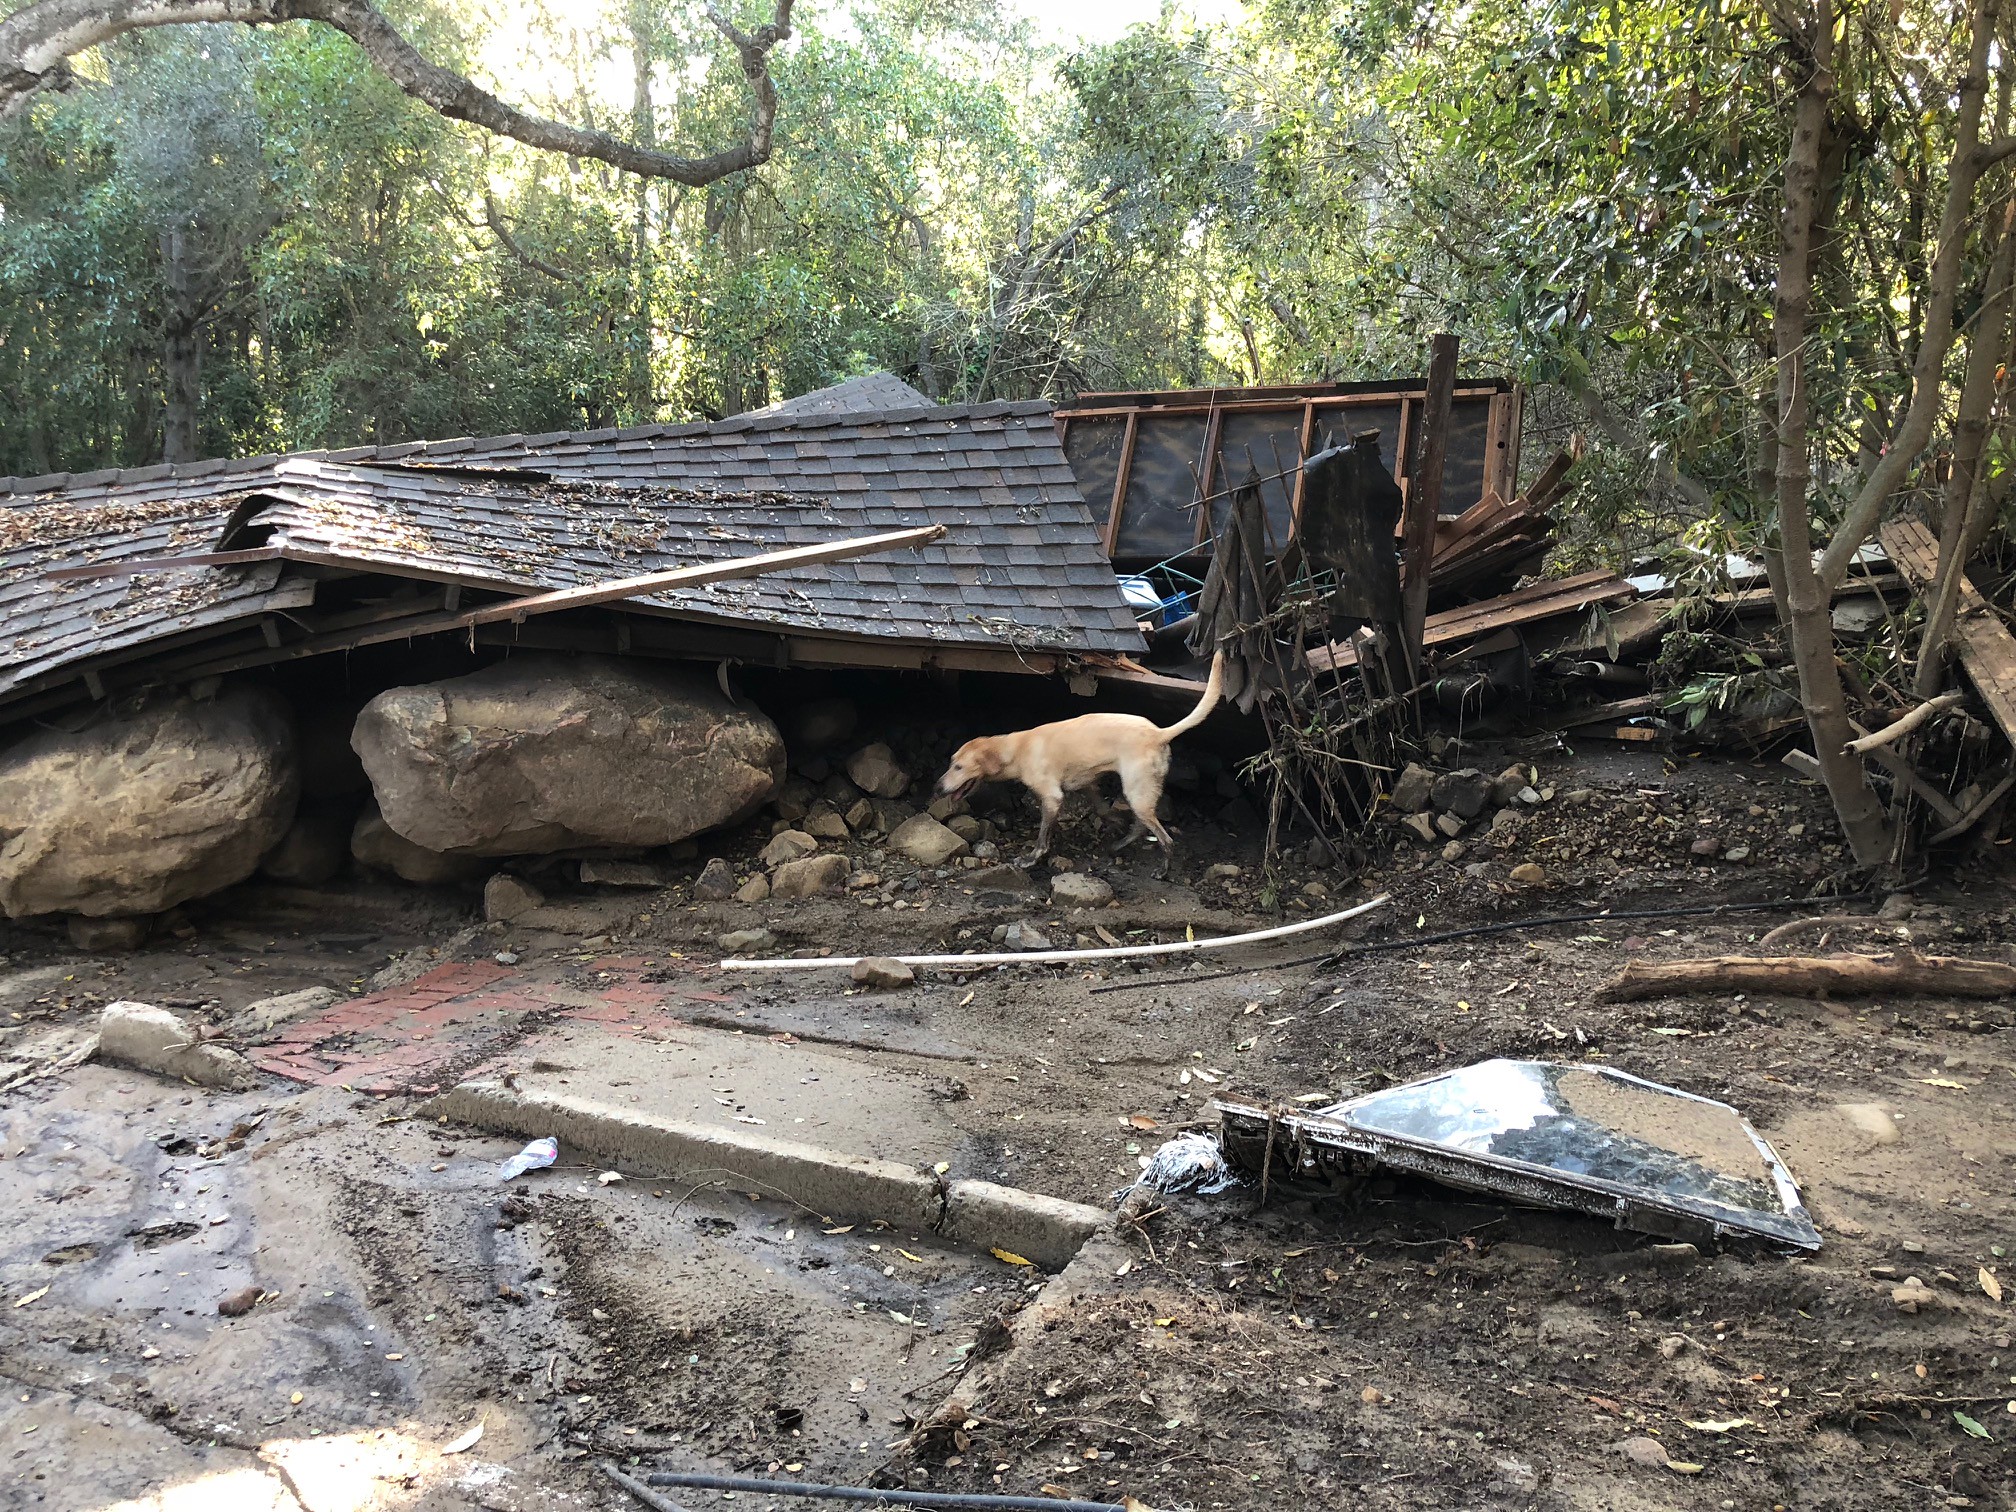 Search dog patrols collapsed house with obvious mud and debris flow surrounding the fallen structure.